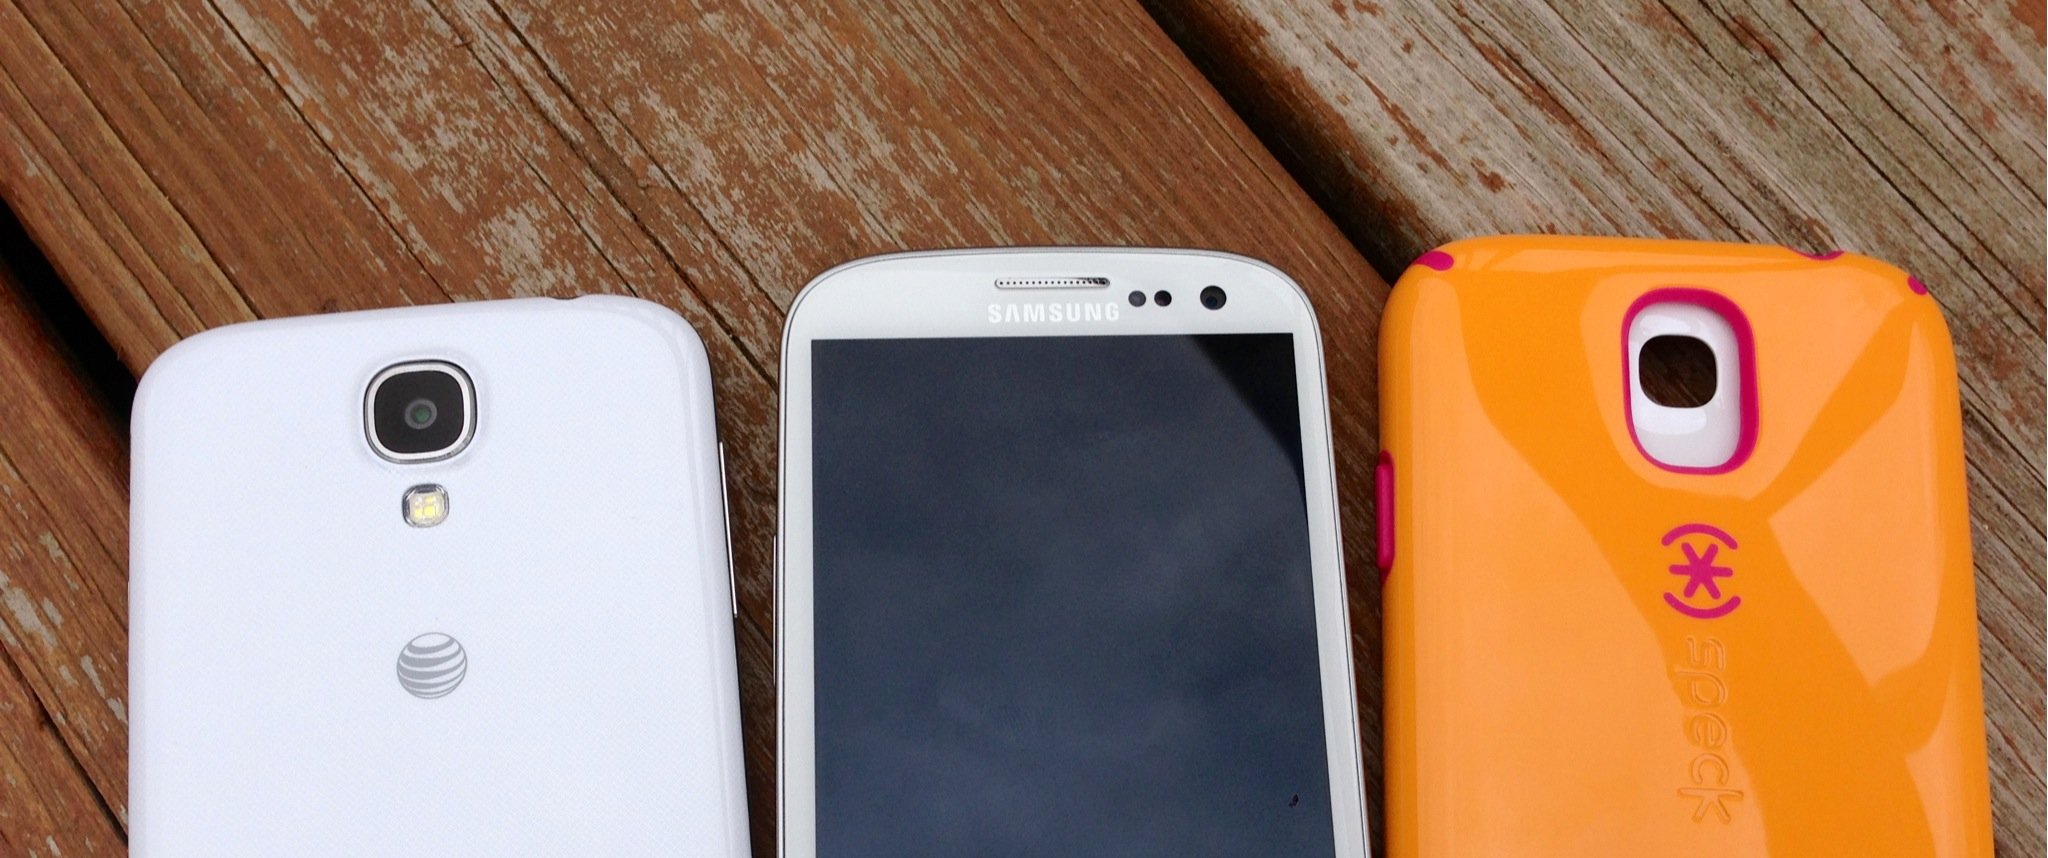 The Samsung Galaxy S4 mini, Galaxy S4 Zoom camera phone and a rugged, orange Samsung Galaxy S4 Activ are rumored for release in June and July after a May announcement, possibly at CTIA.